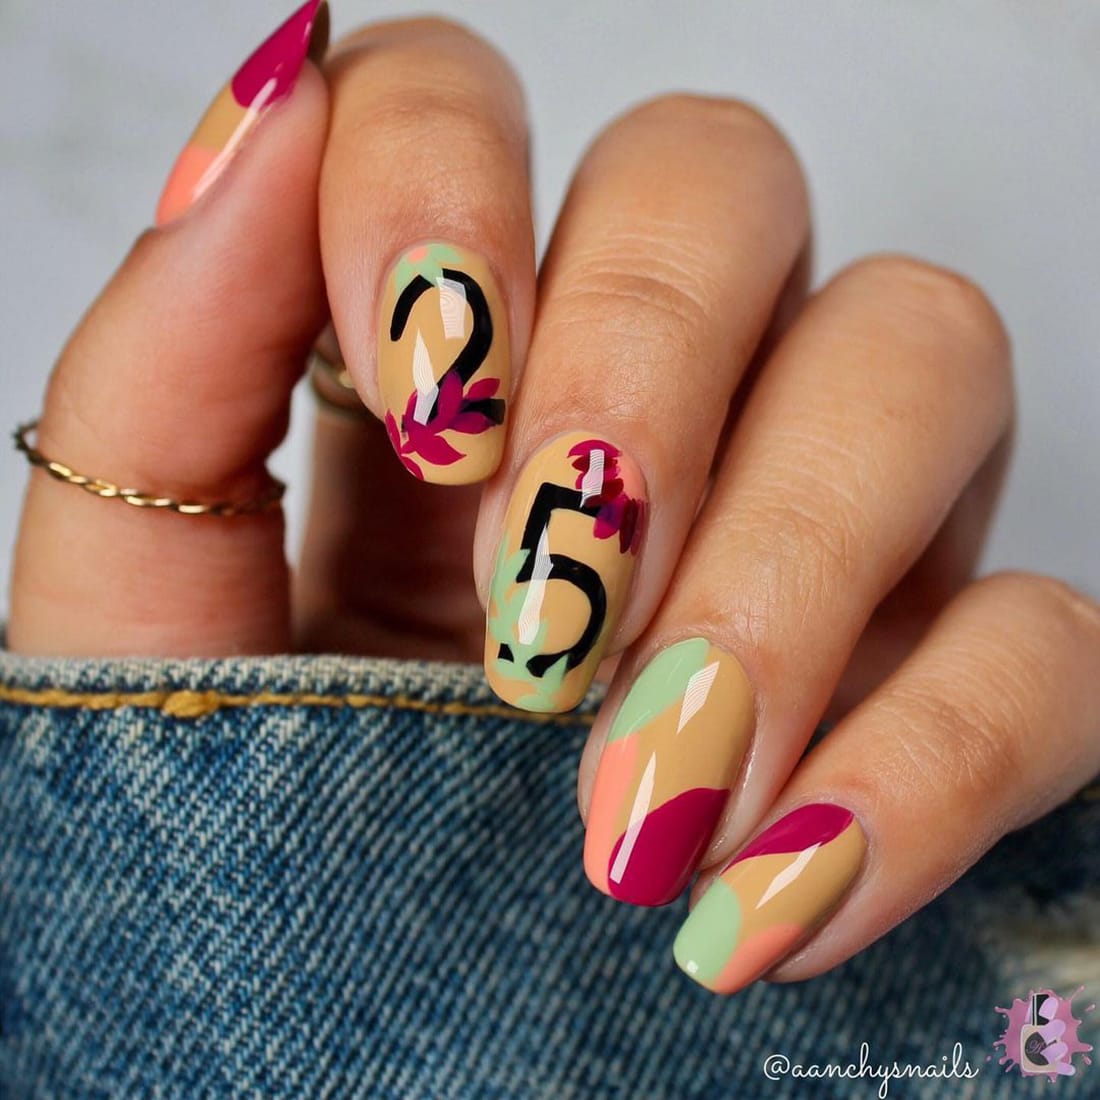 Birthday colored short nails with numbers